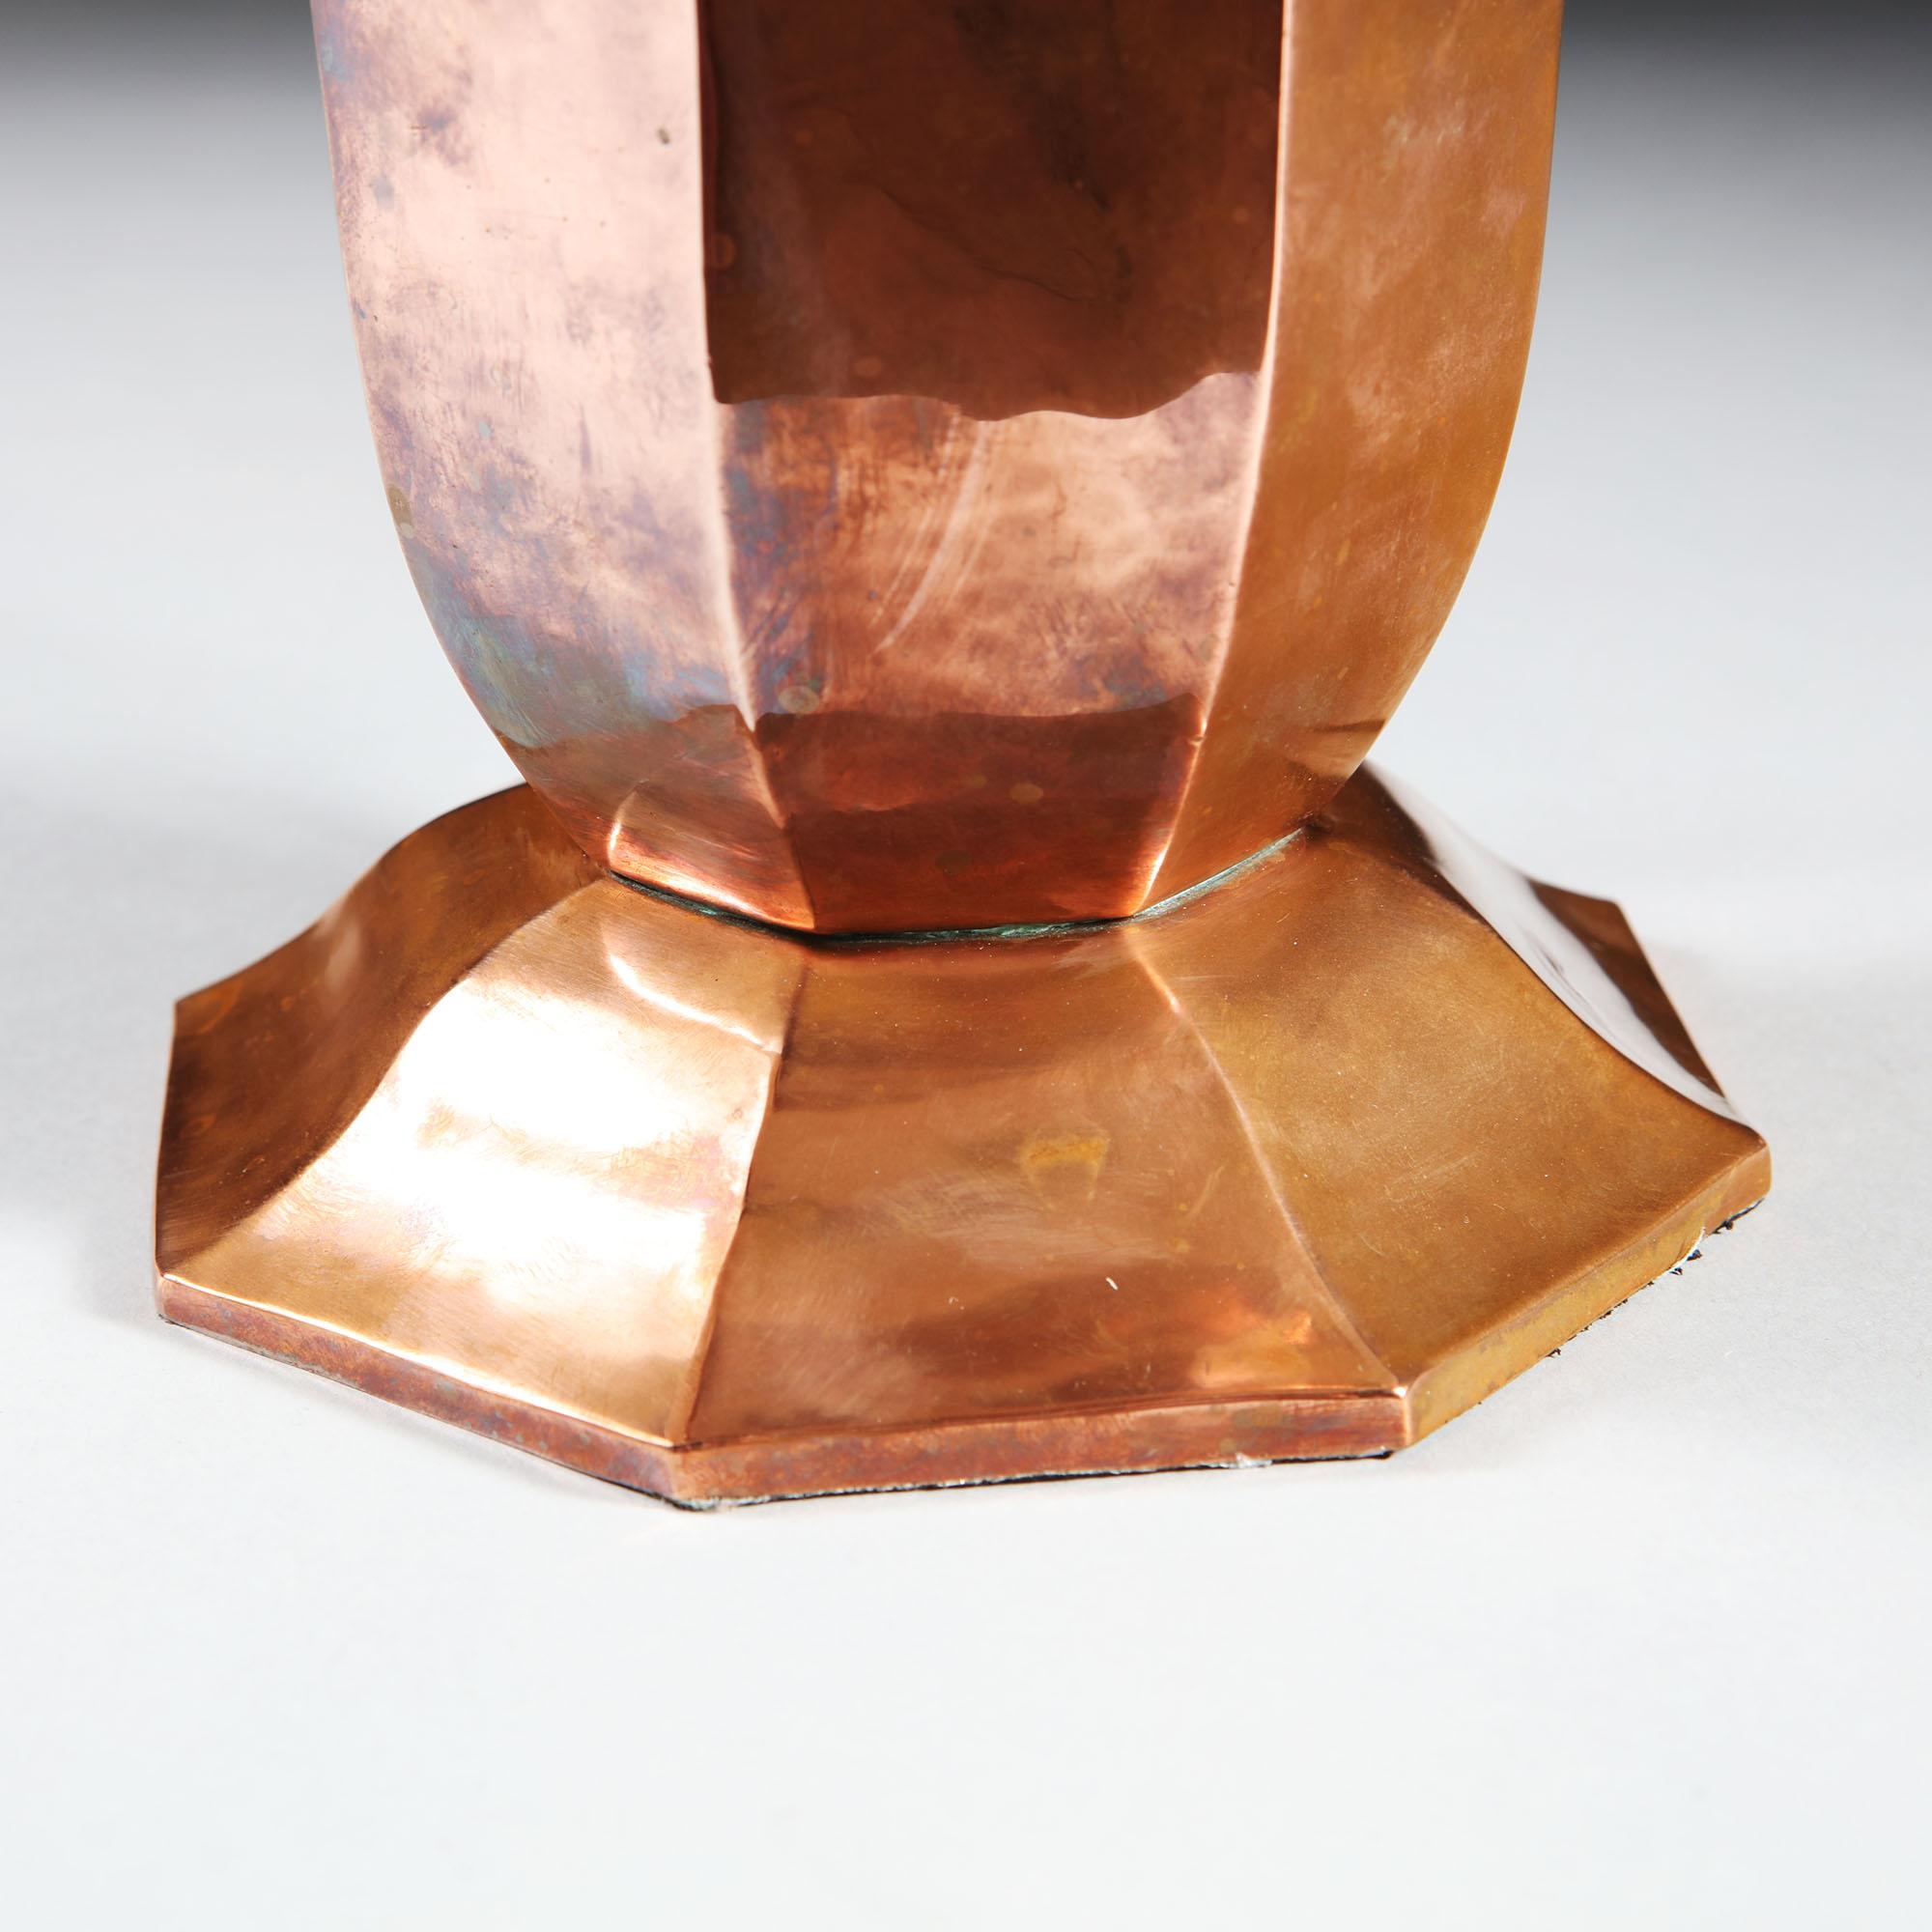 An early 20th century French copper vase of octagonal form, with a flared neck and raised base, now mounted as a table lamp.

Please note: Lampshade not included.

Currently wired for the UK.